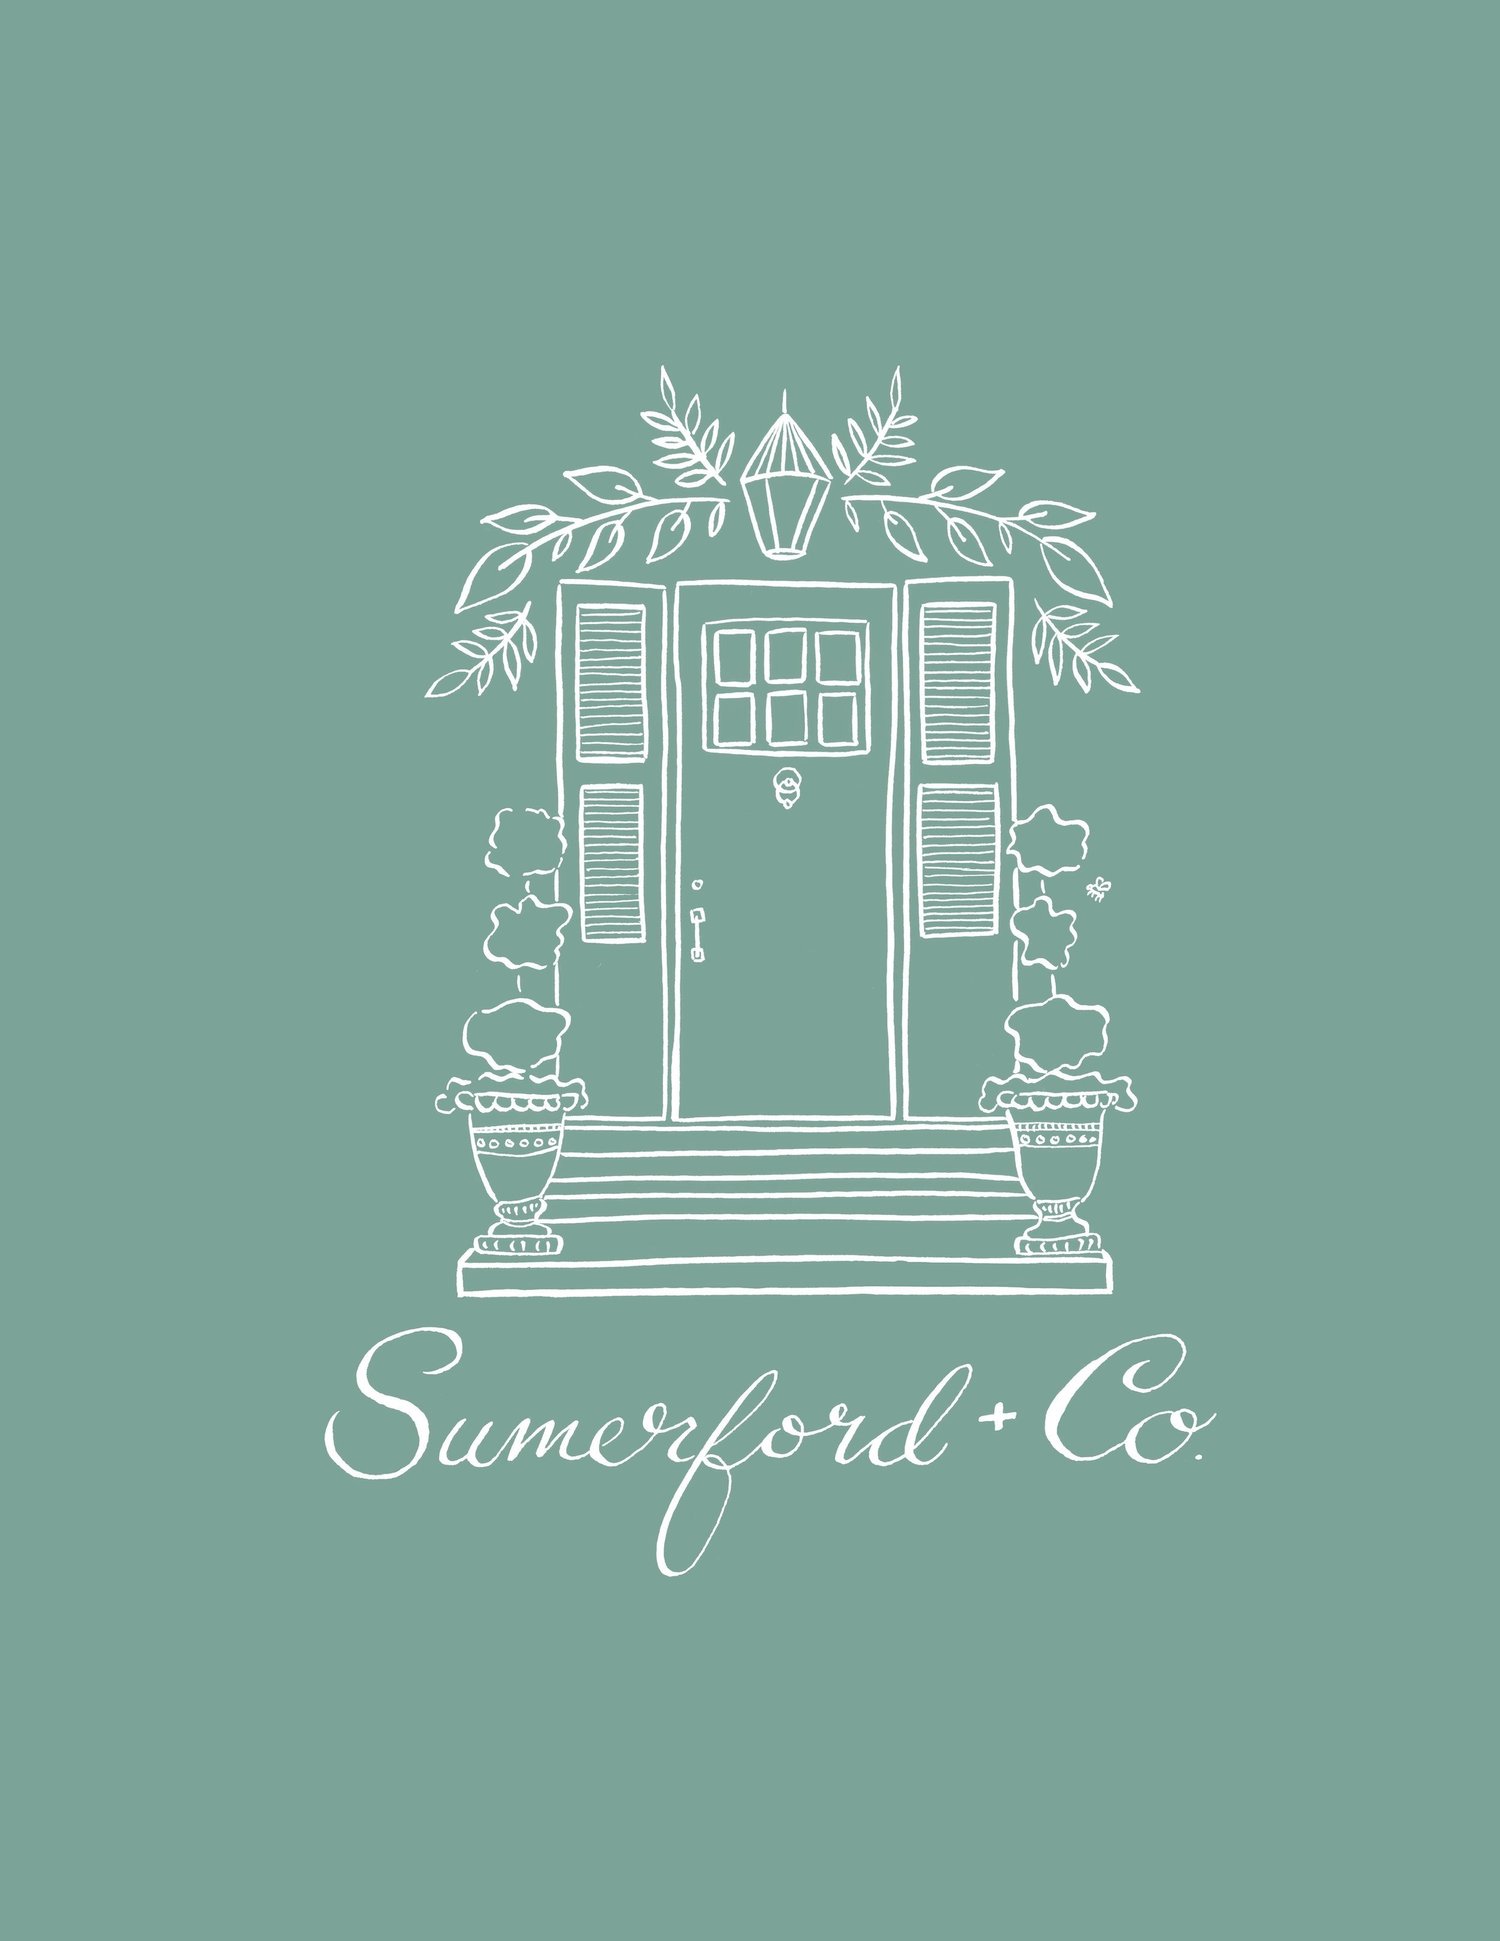 Sumerford + Co.